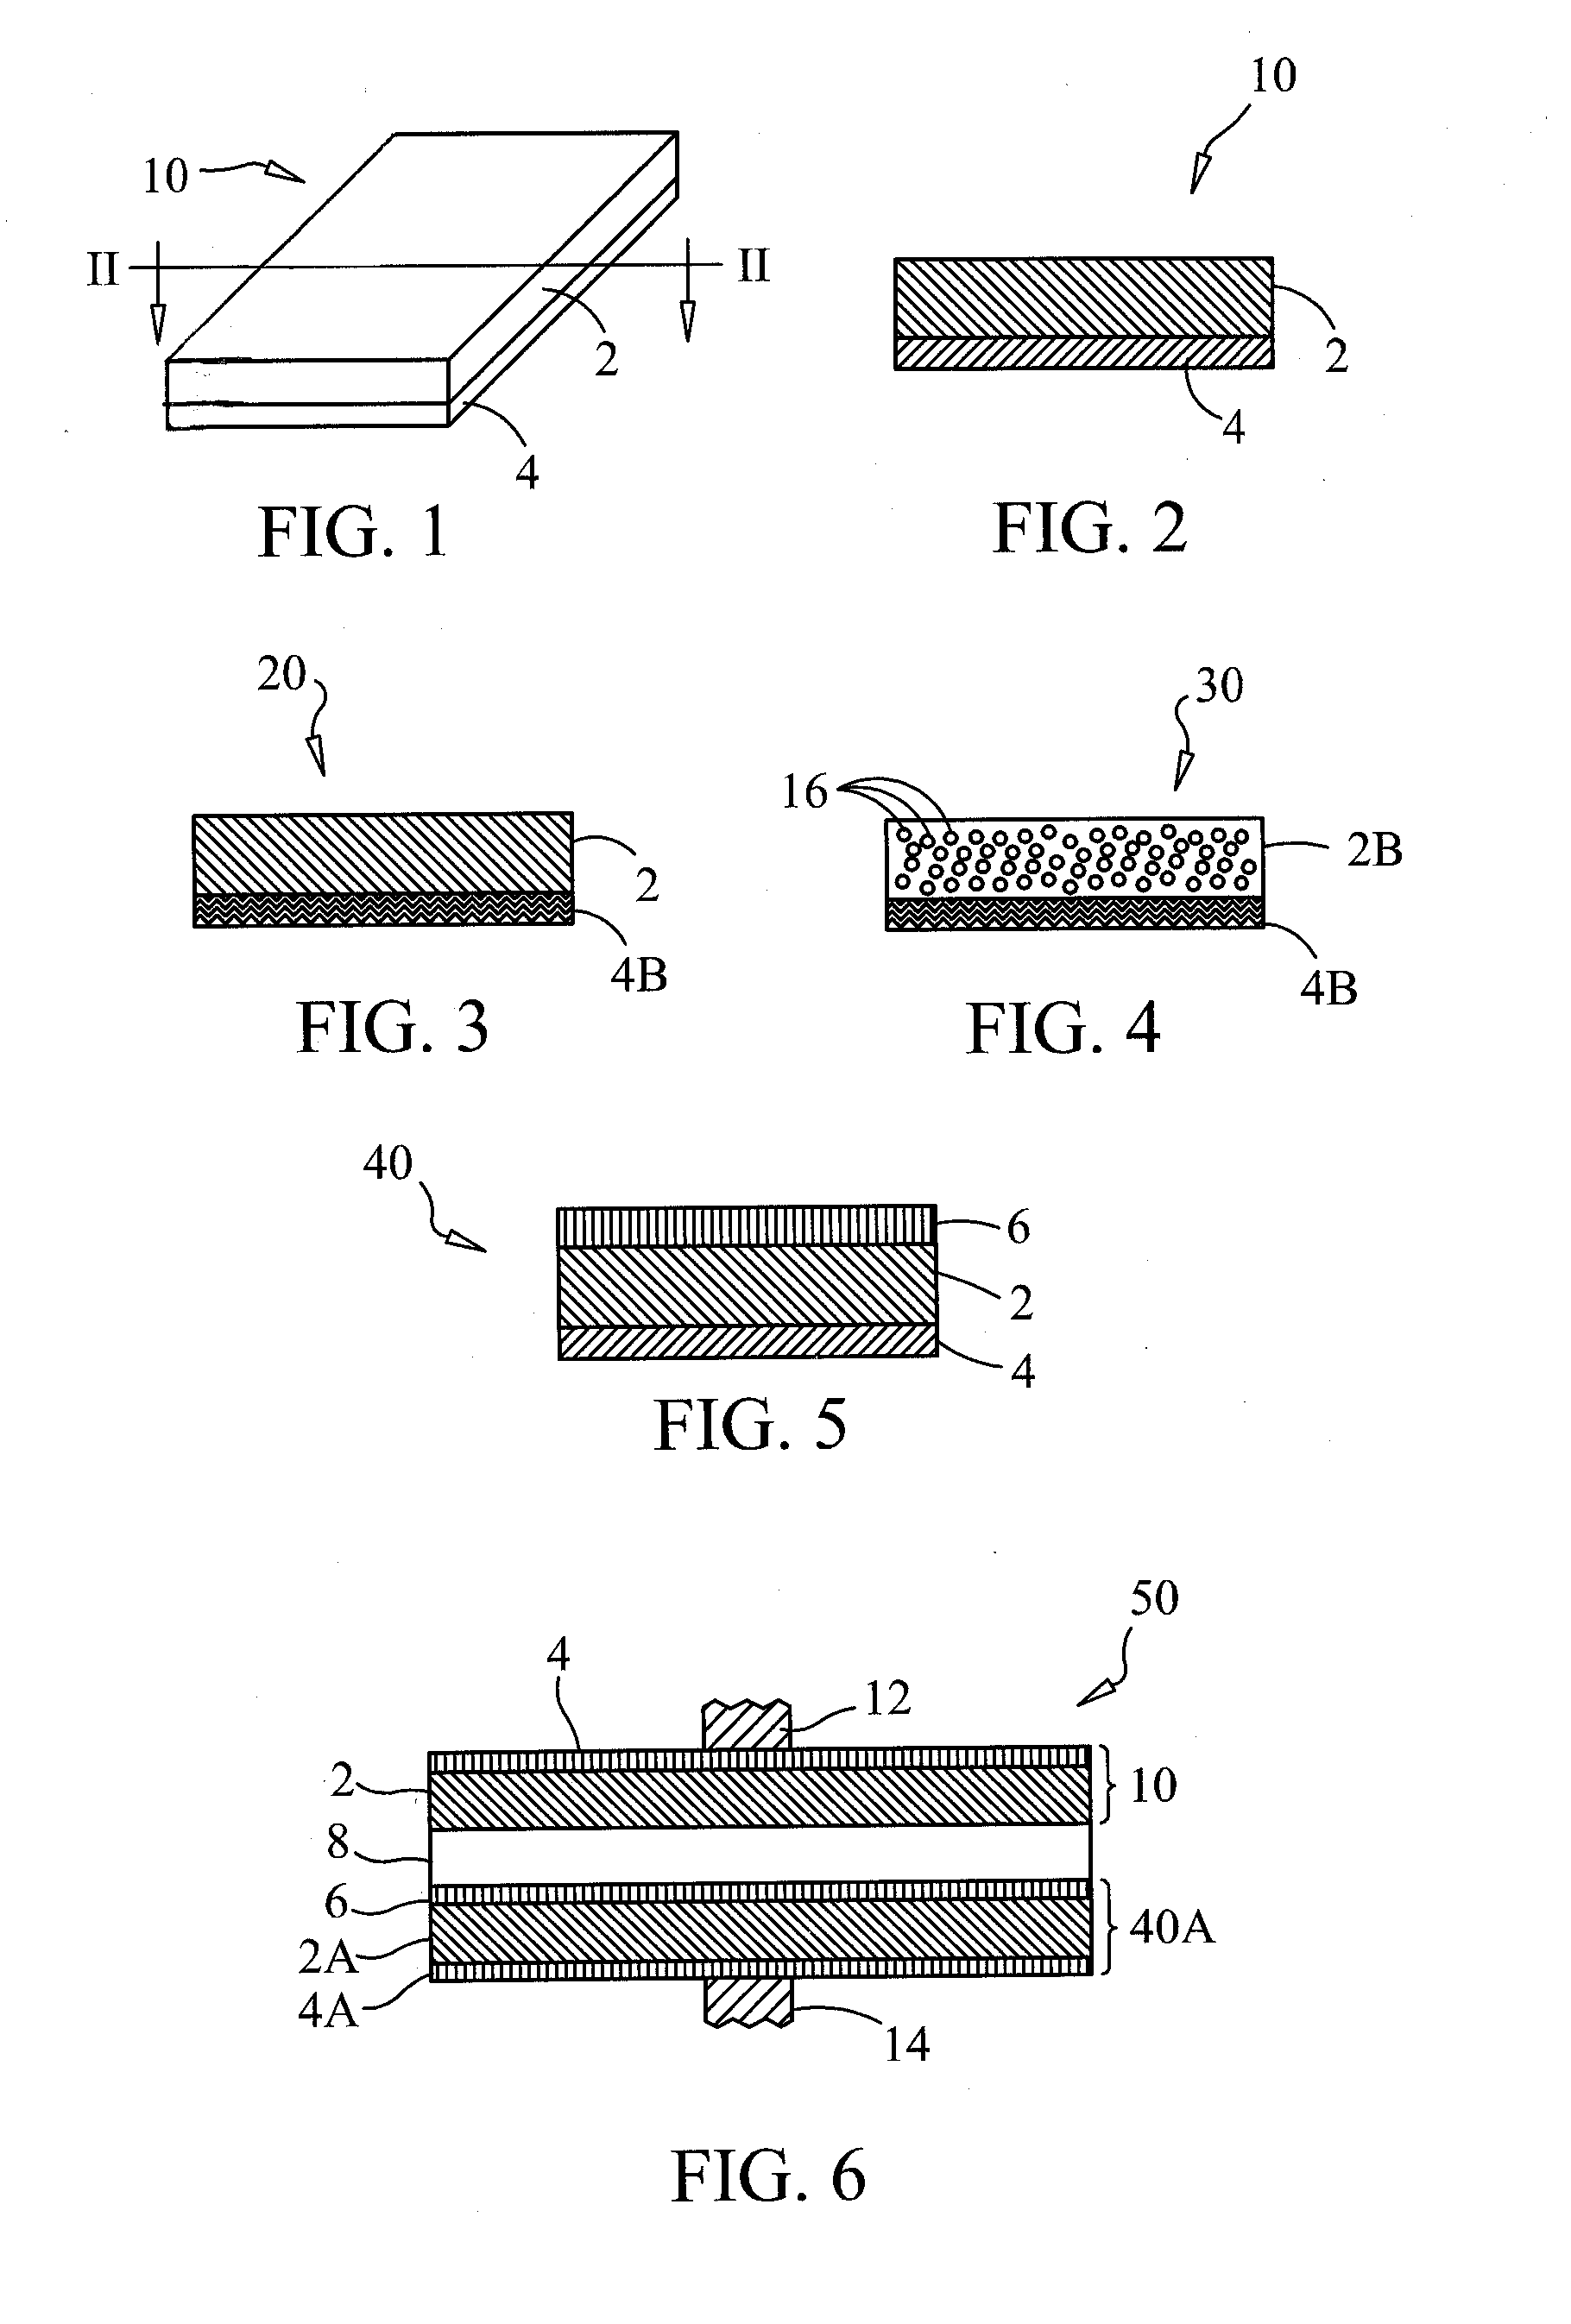 Electro-blotting devices, systems, and kits, and methods for their use